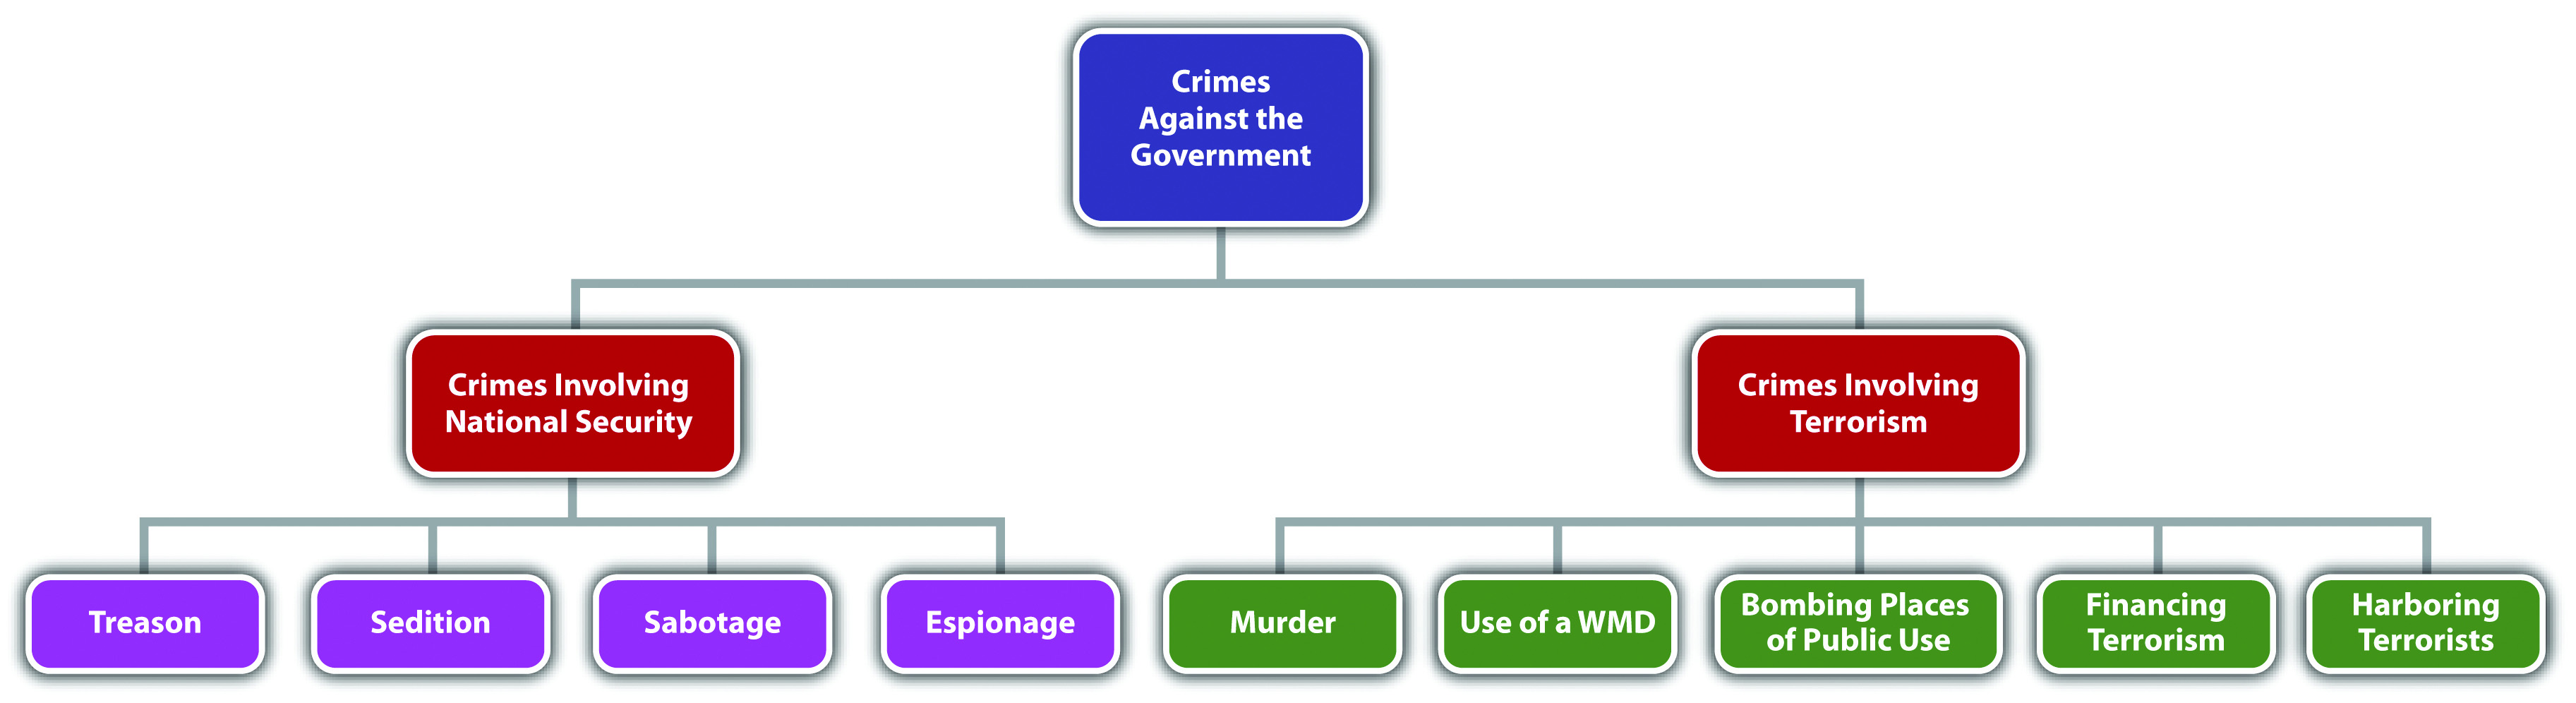 Diagram of Crimes Involving National Security and Terrorism